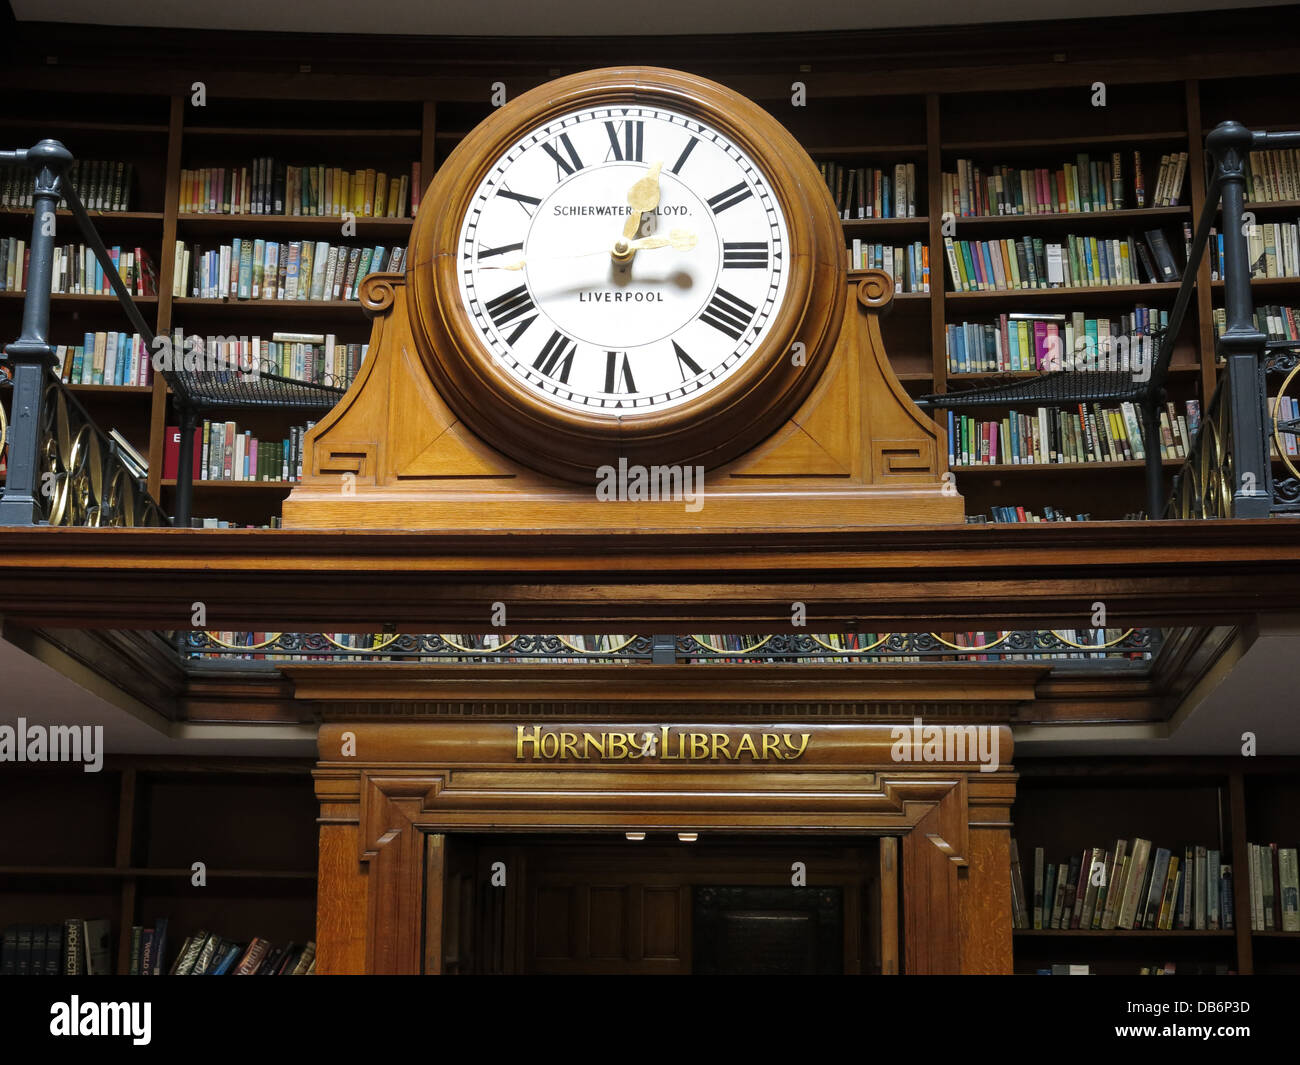 Liverpool Central Library, The Hornby Library Clock, Liverpool Central Library, Liverpool, England, Großbritannien, L3 8EW Stockfoto